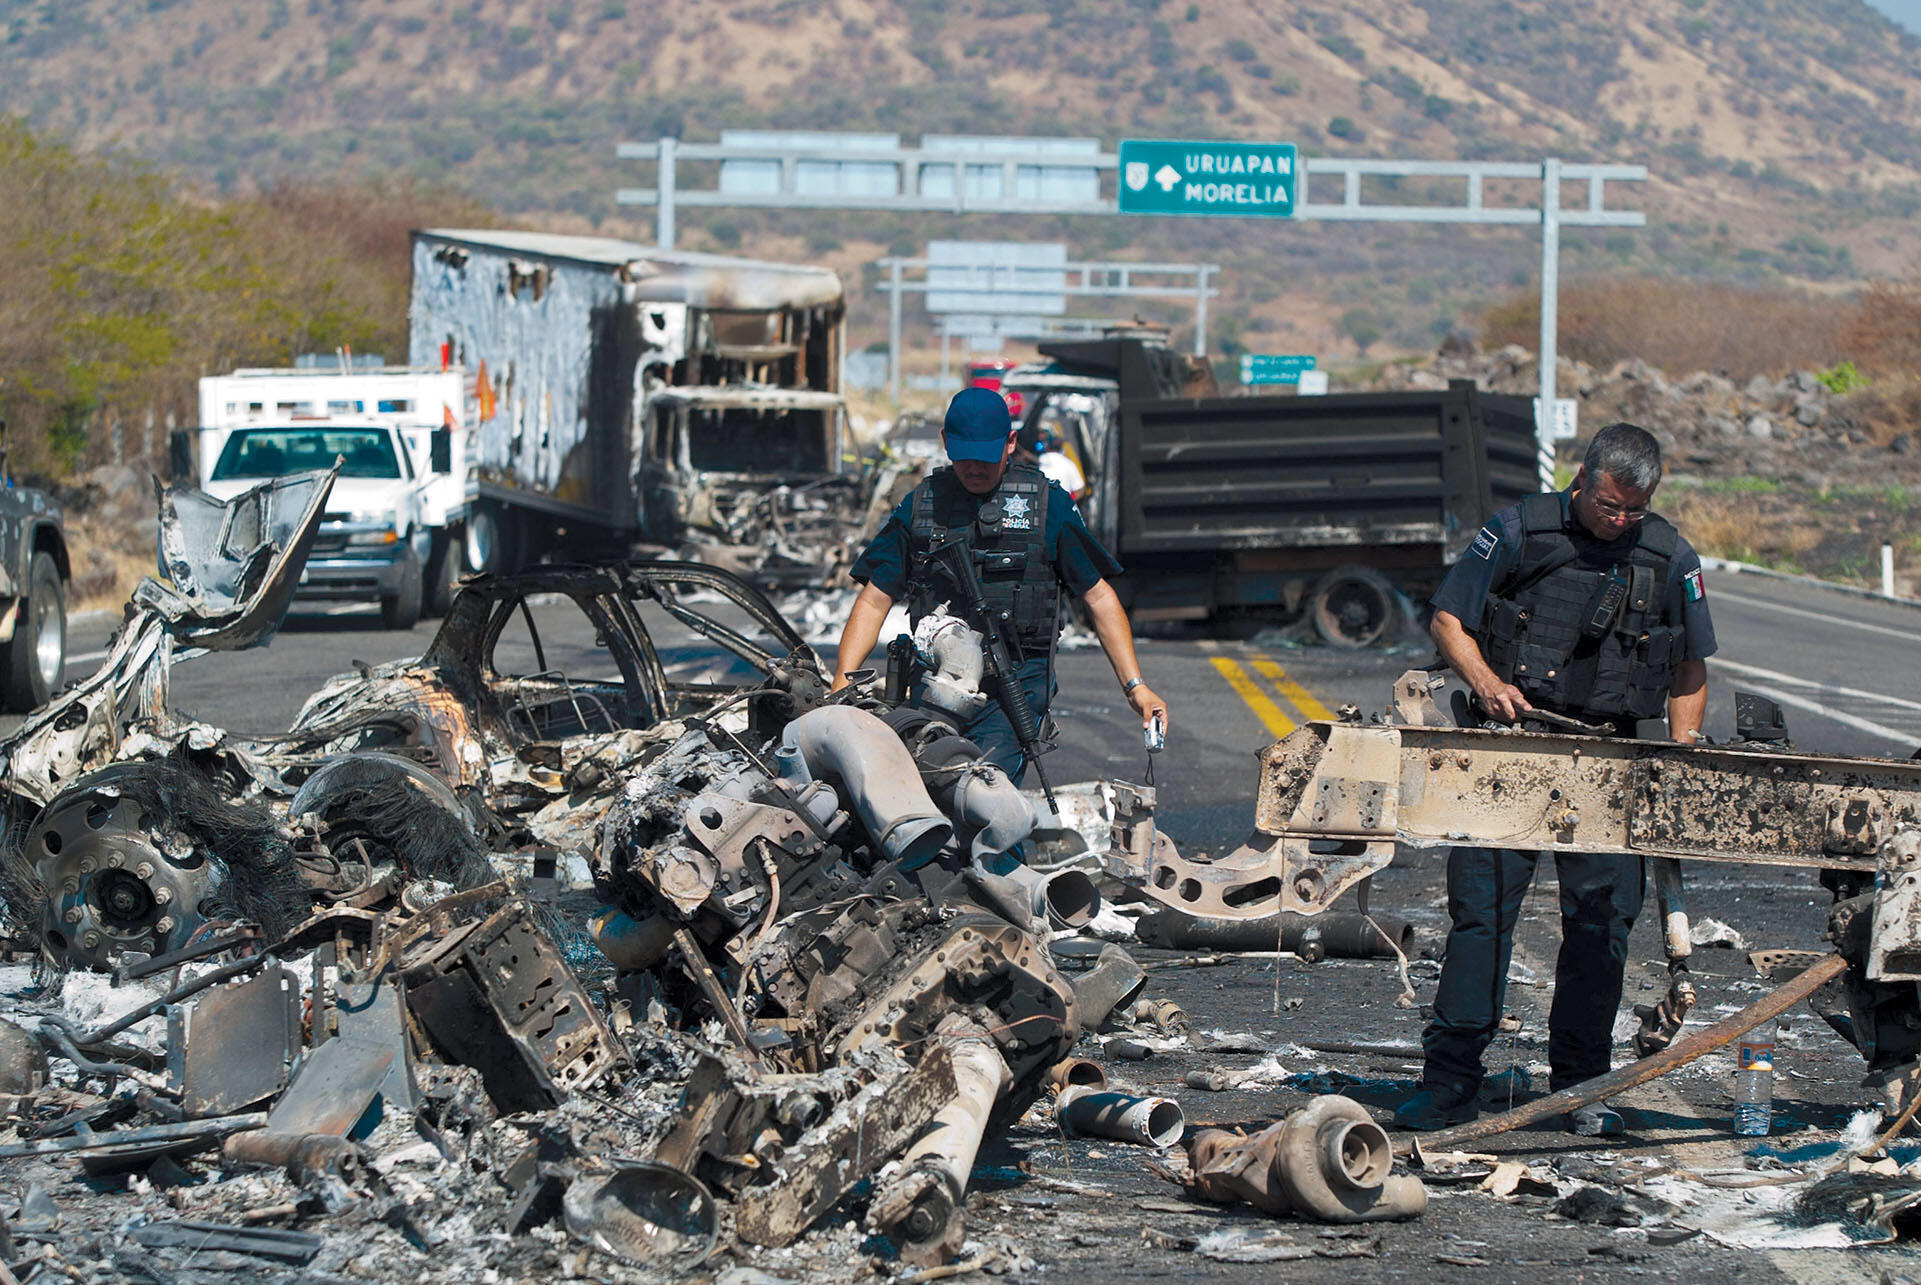 Bullet-ridden and burned-out vehicles line the road in the aftermath of a battle between the Mexican federal police and the La Familia Michoacana cartel in Apatzingán, Michoacán. (Photo by Fernando Castillo/LatinContent/Getty Images.)